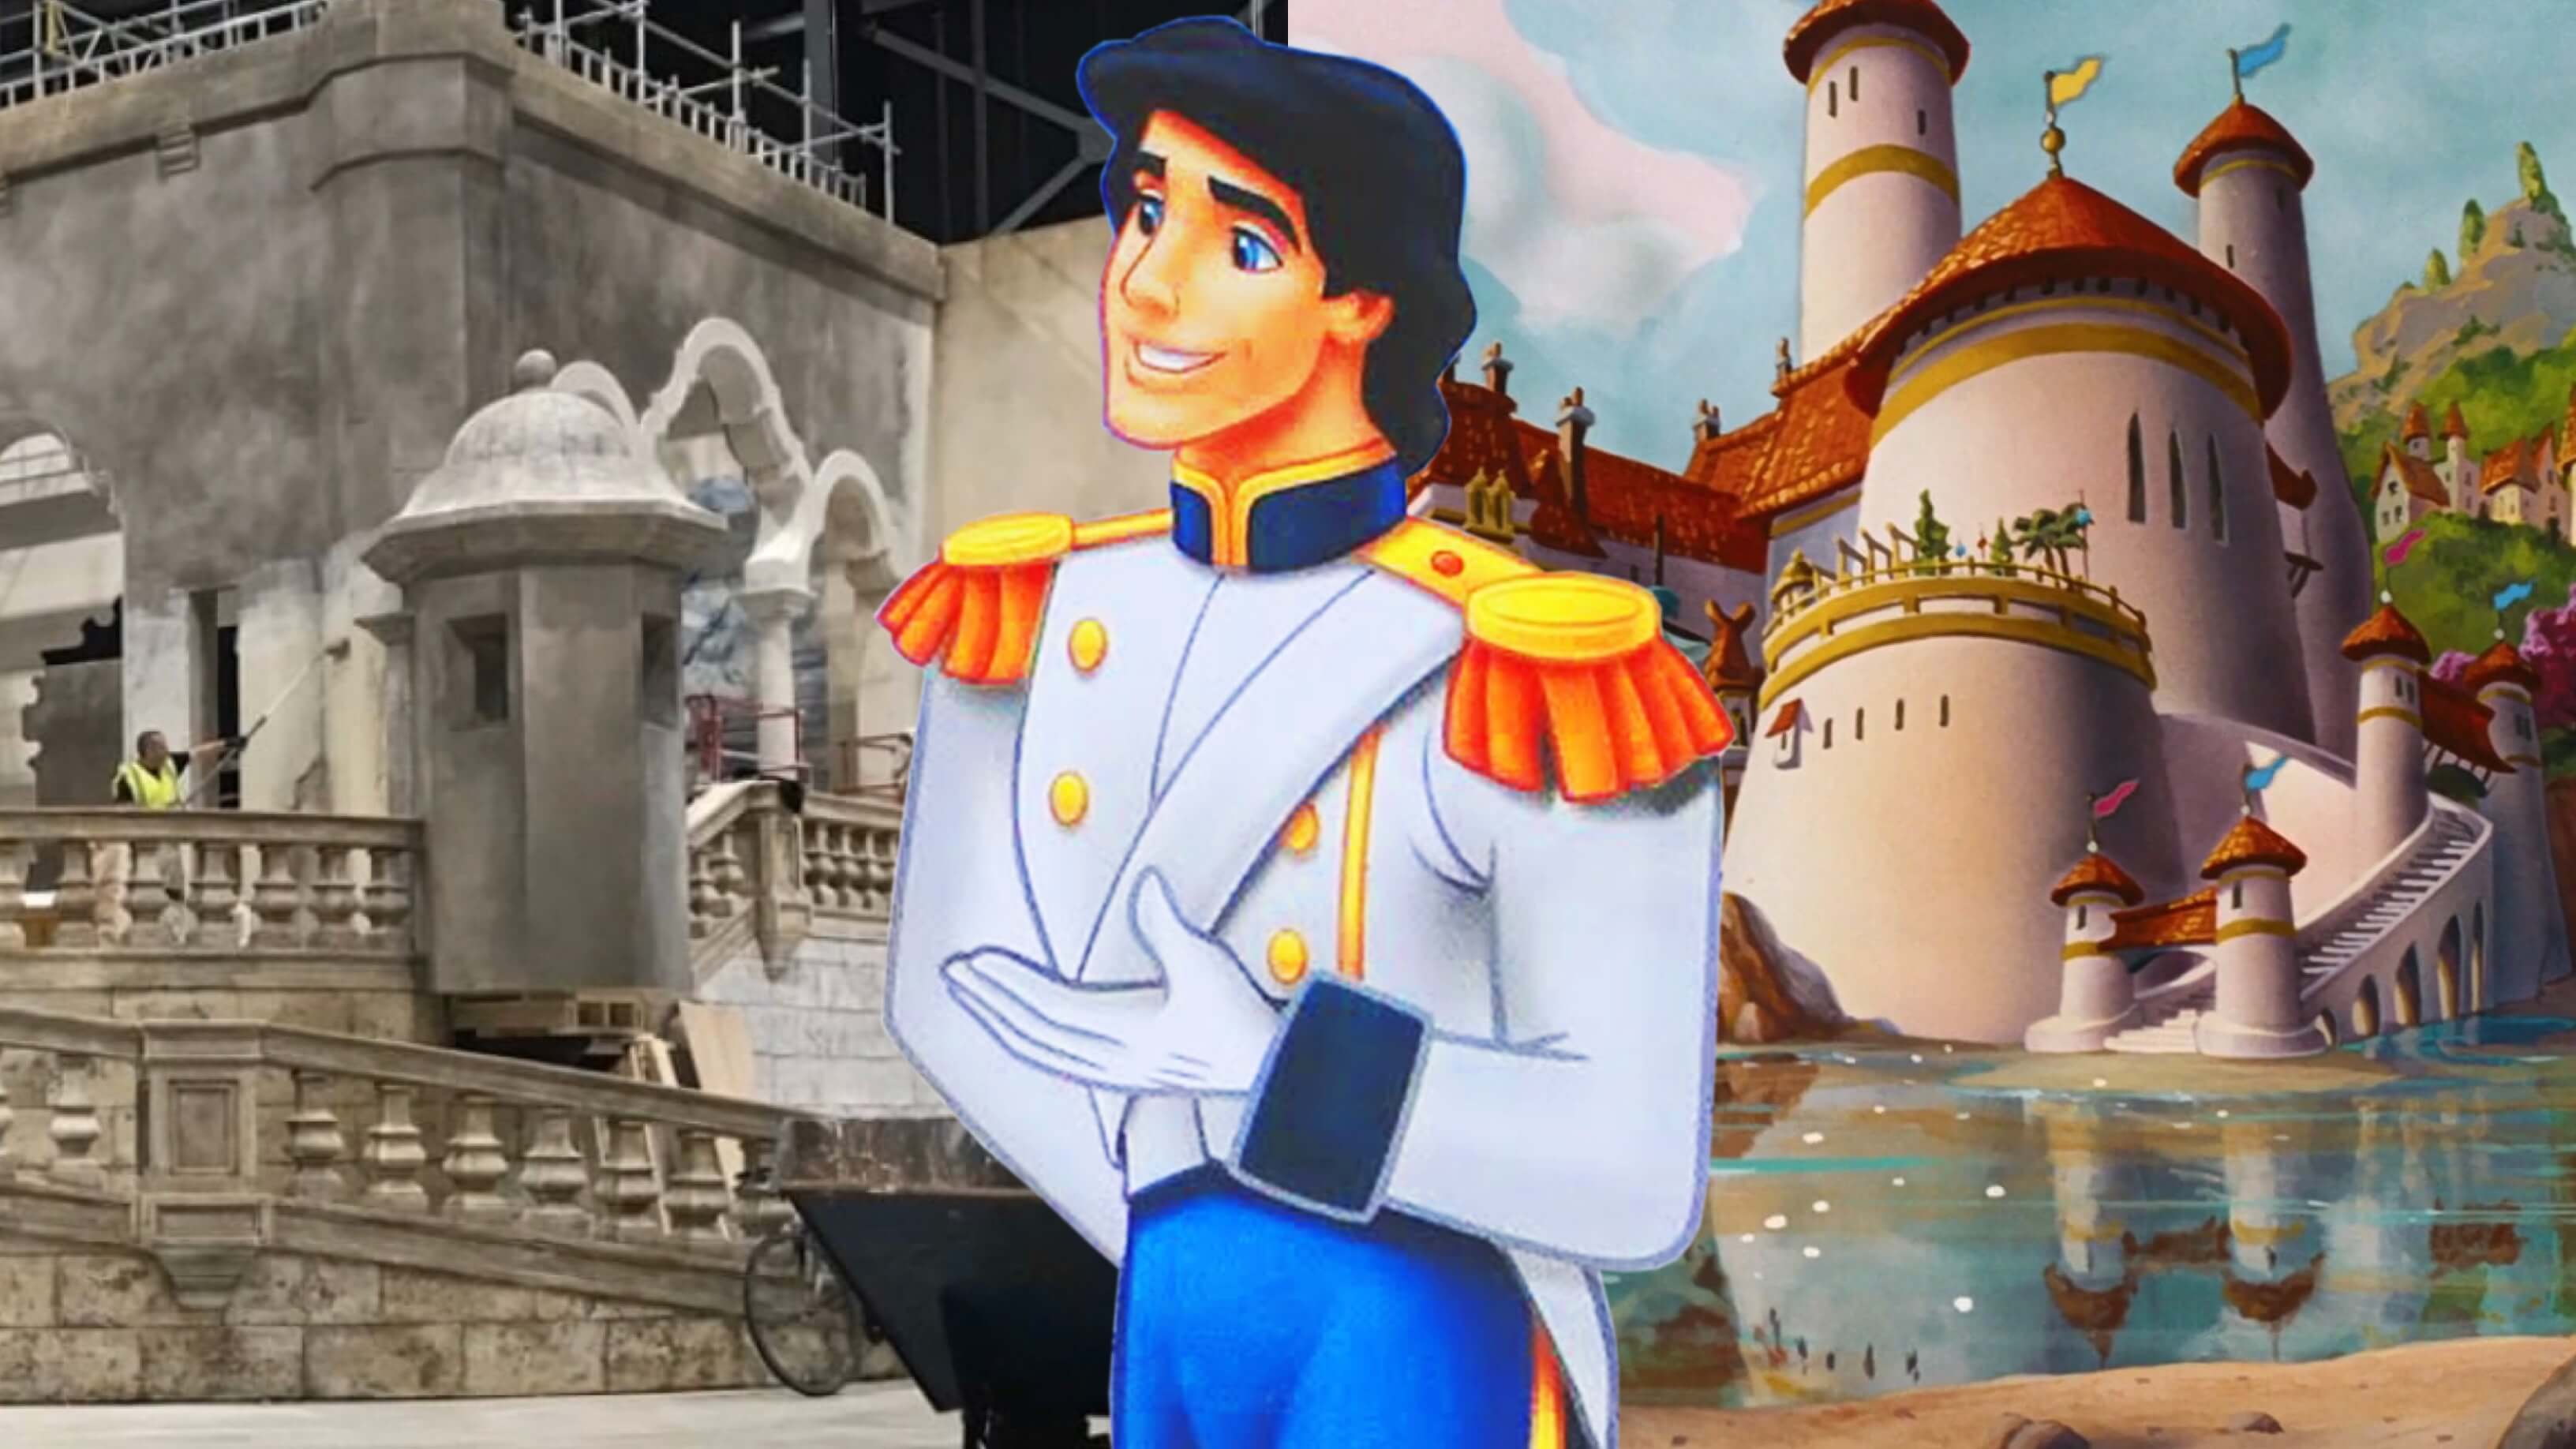 First Look at Prince Eric’s Castle For The Live-Action ‘The Little Mermaid’